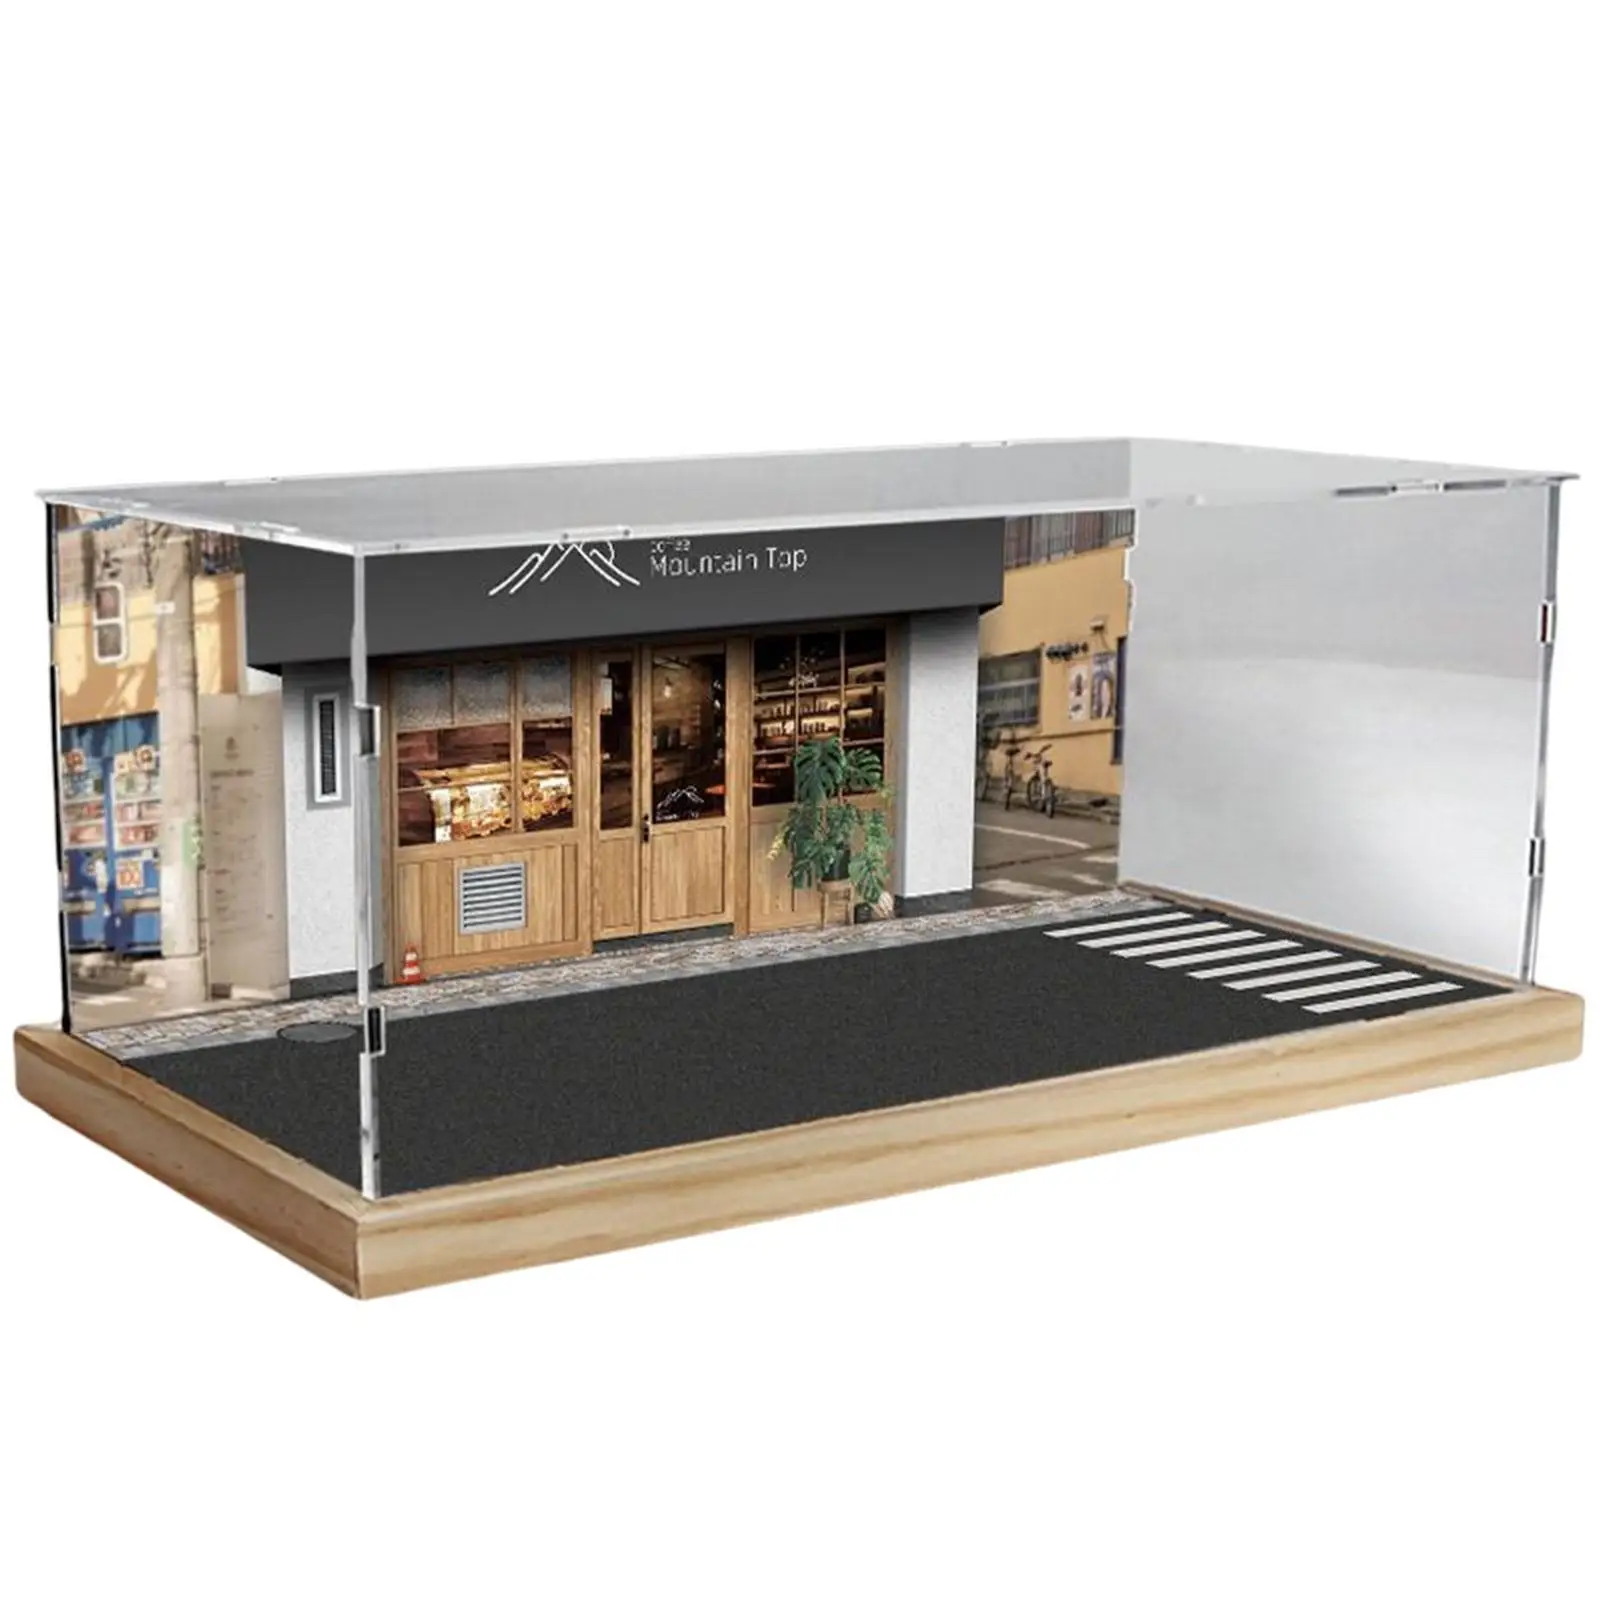 Japanese Street Scene 1/32 Scale Parking Lot Display Case for Vehicle Car